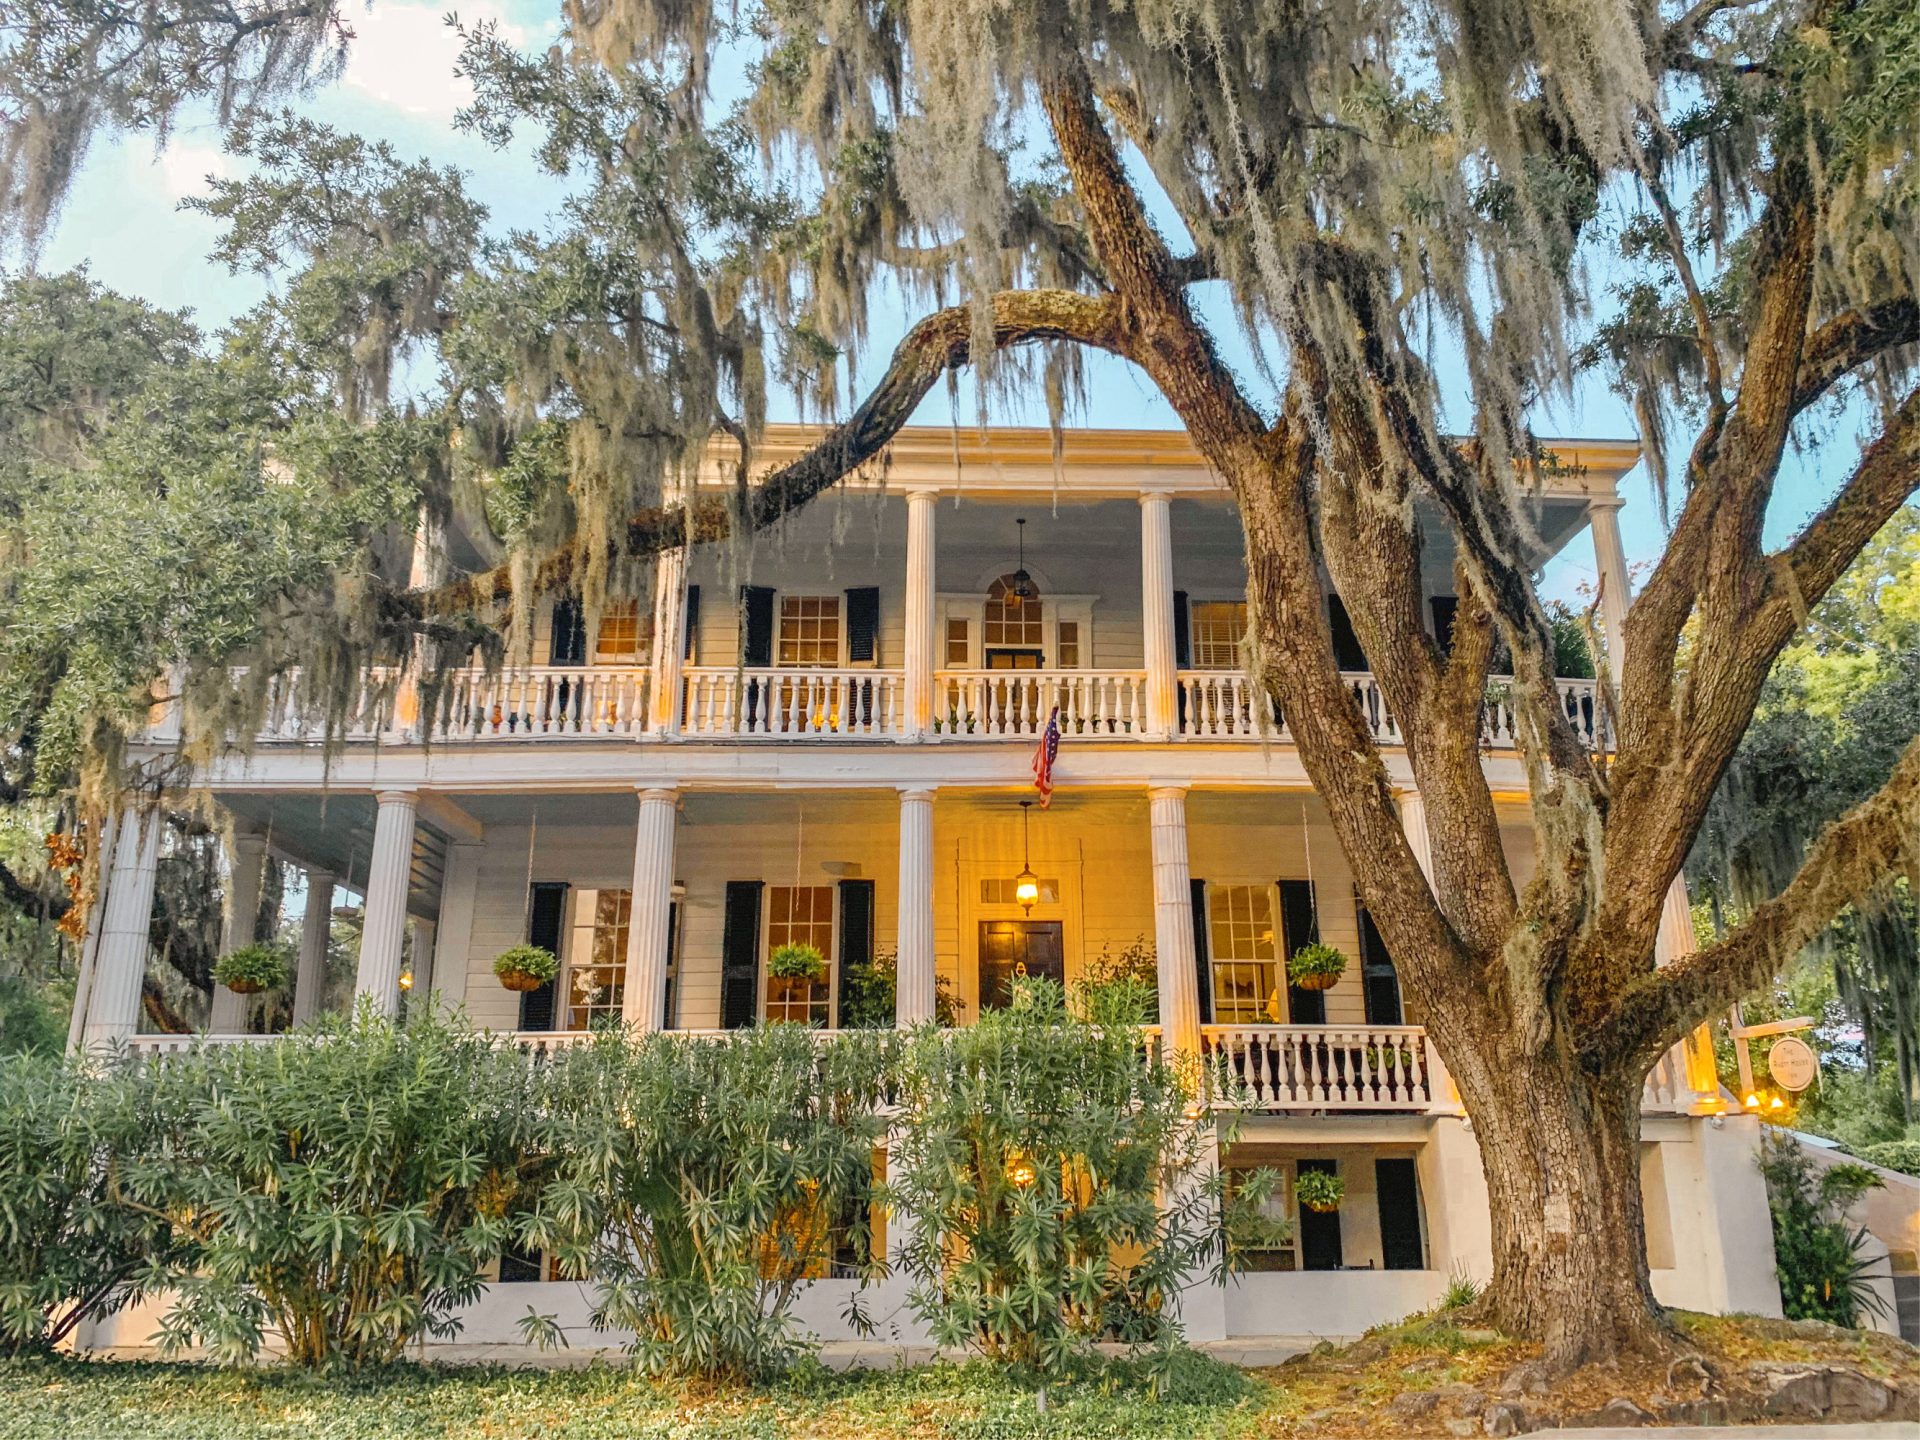 Beaufort travel, Thomas Rhett house, bed and breakfast, low country, travel guide, weekend trip, road trip, marsh, where to eat, where to stay, what to do, southern, Spanish moss, beautiful travel